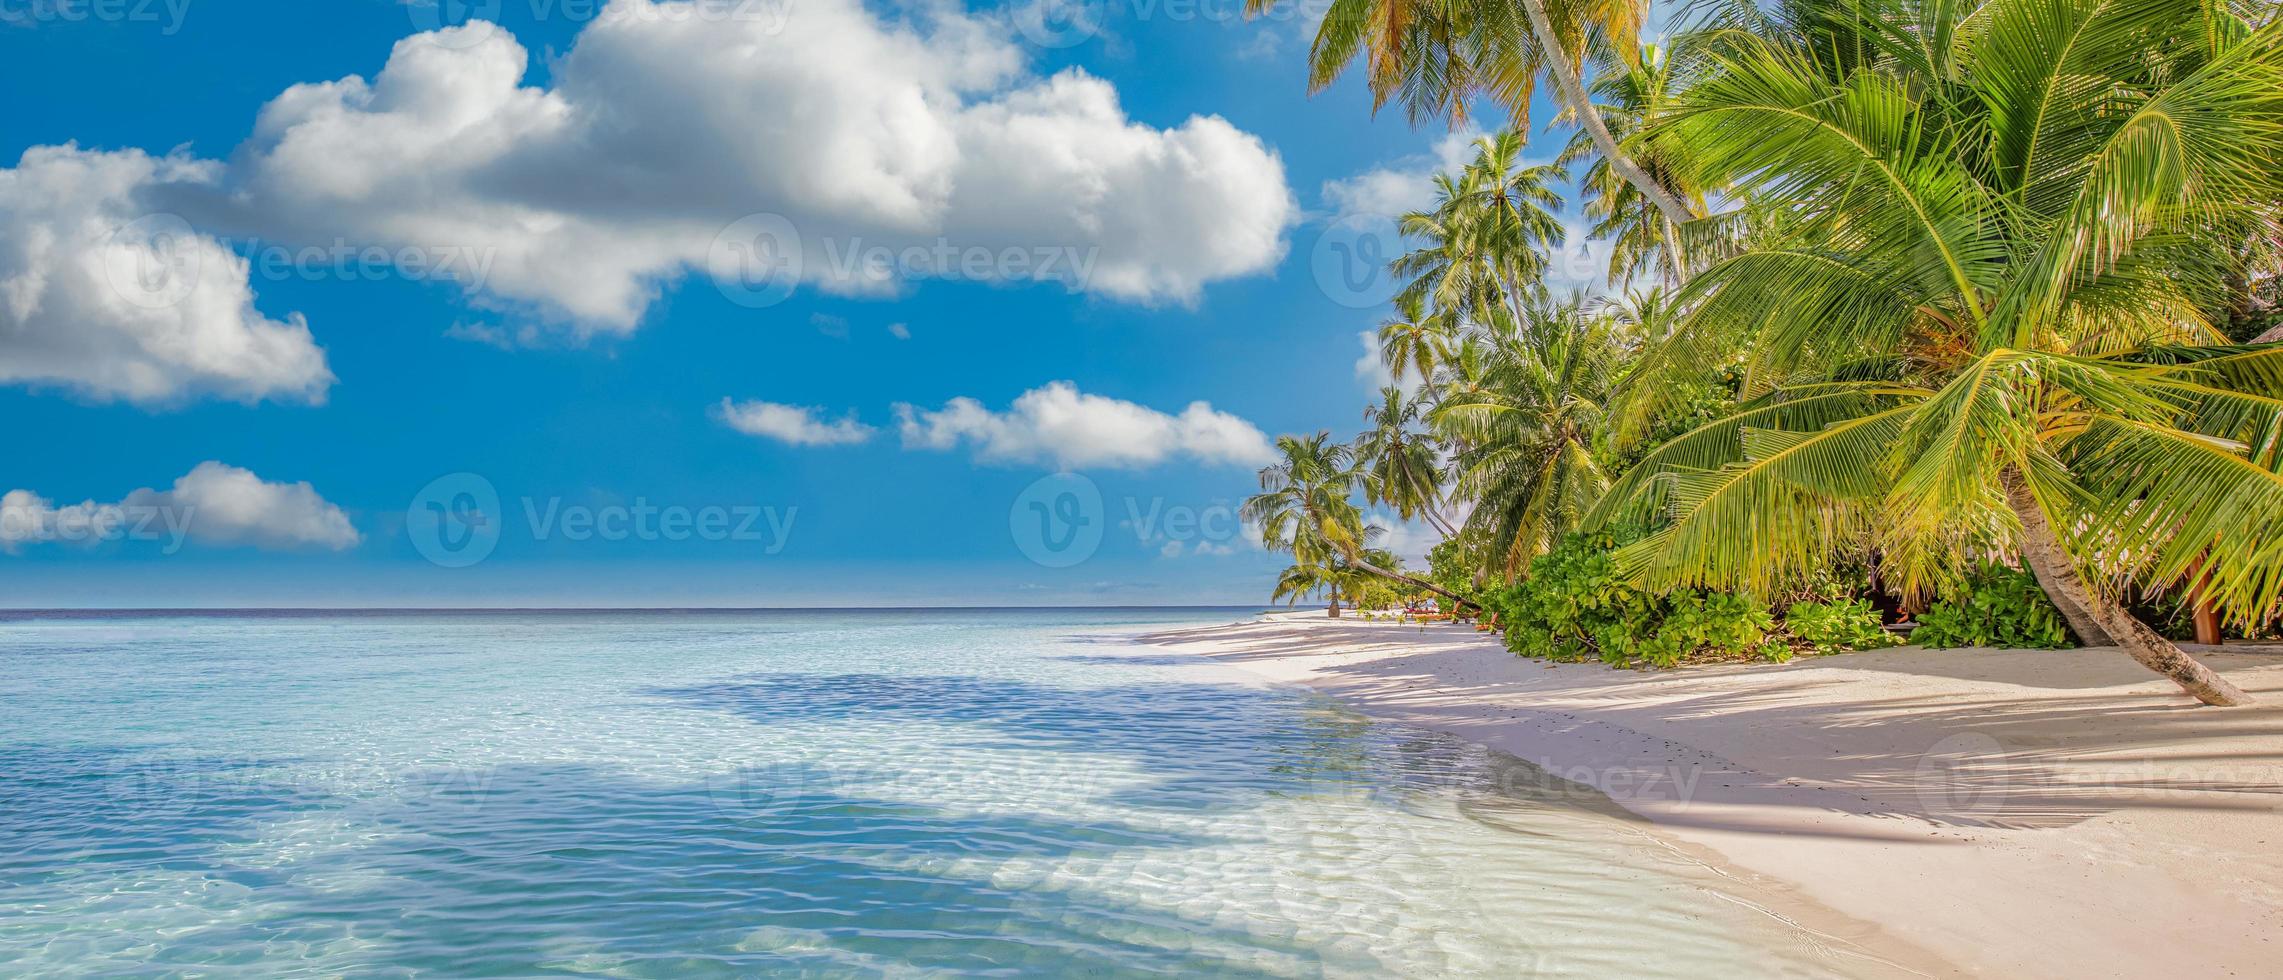 Best summer beach landscape. Tranquil tropical island, paradise coast, sea lagoon, horizon, palm trees and sunny sky over sand waves. Amazing vacation landscape background. Beautiful holiday beach photo